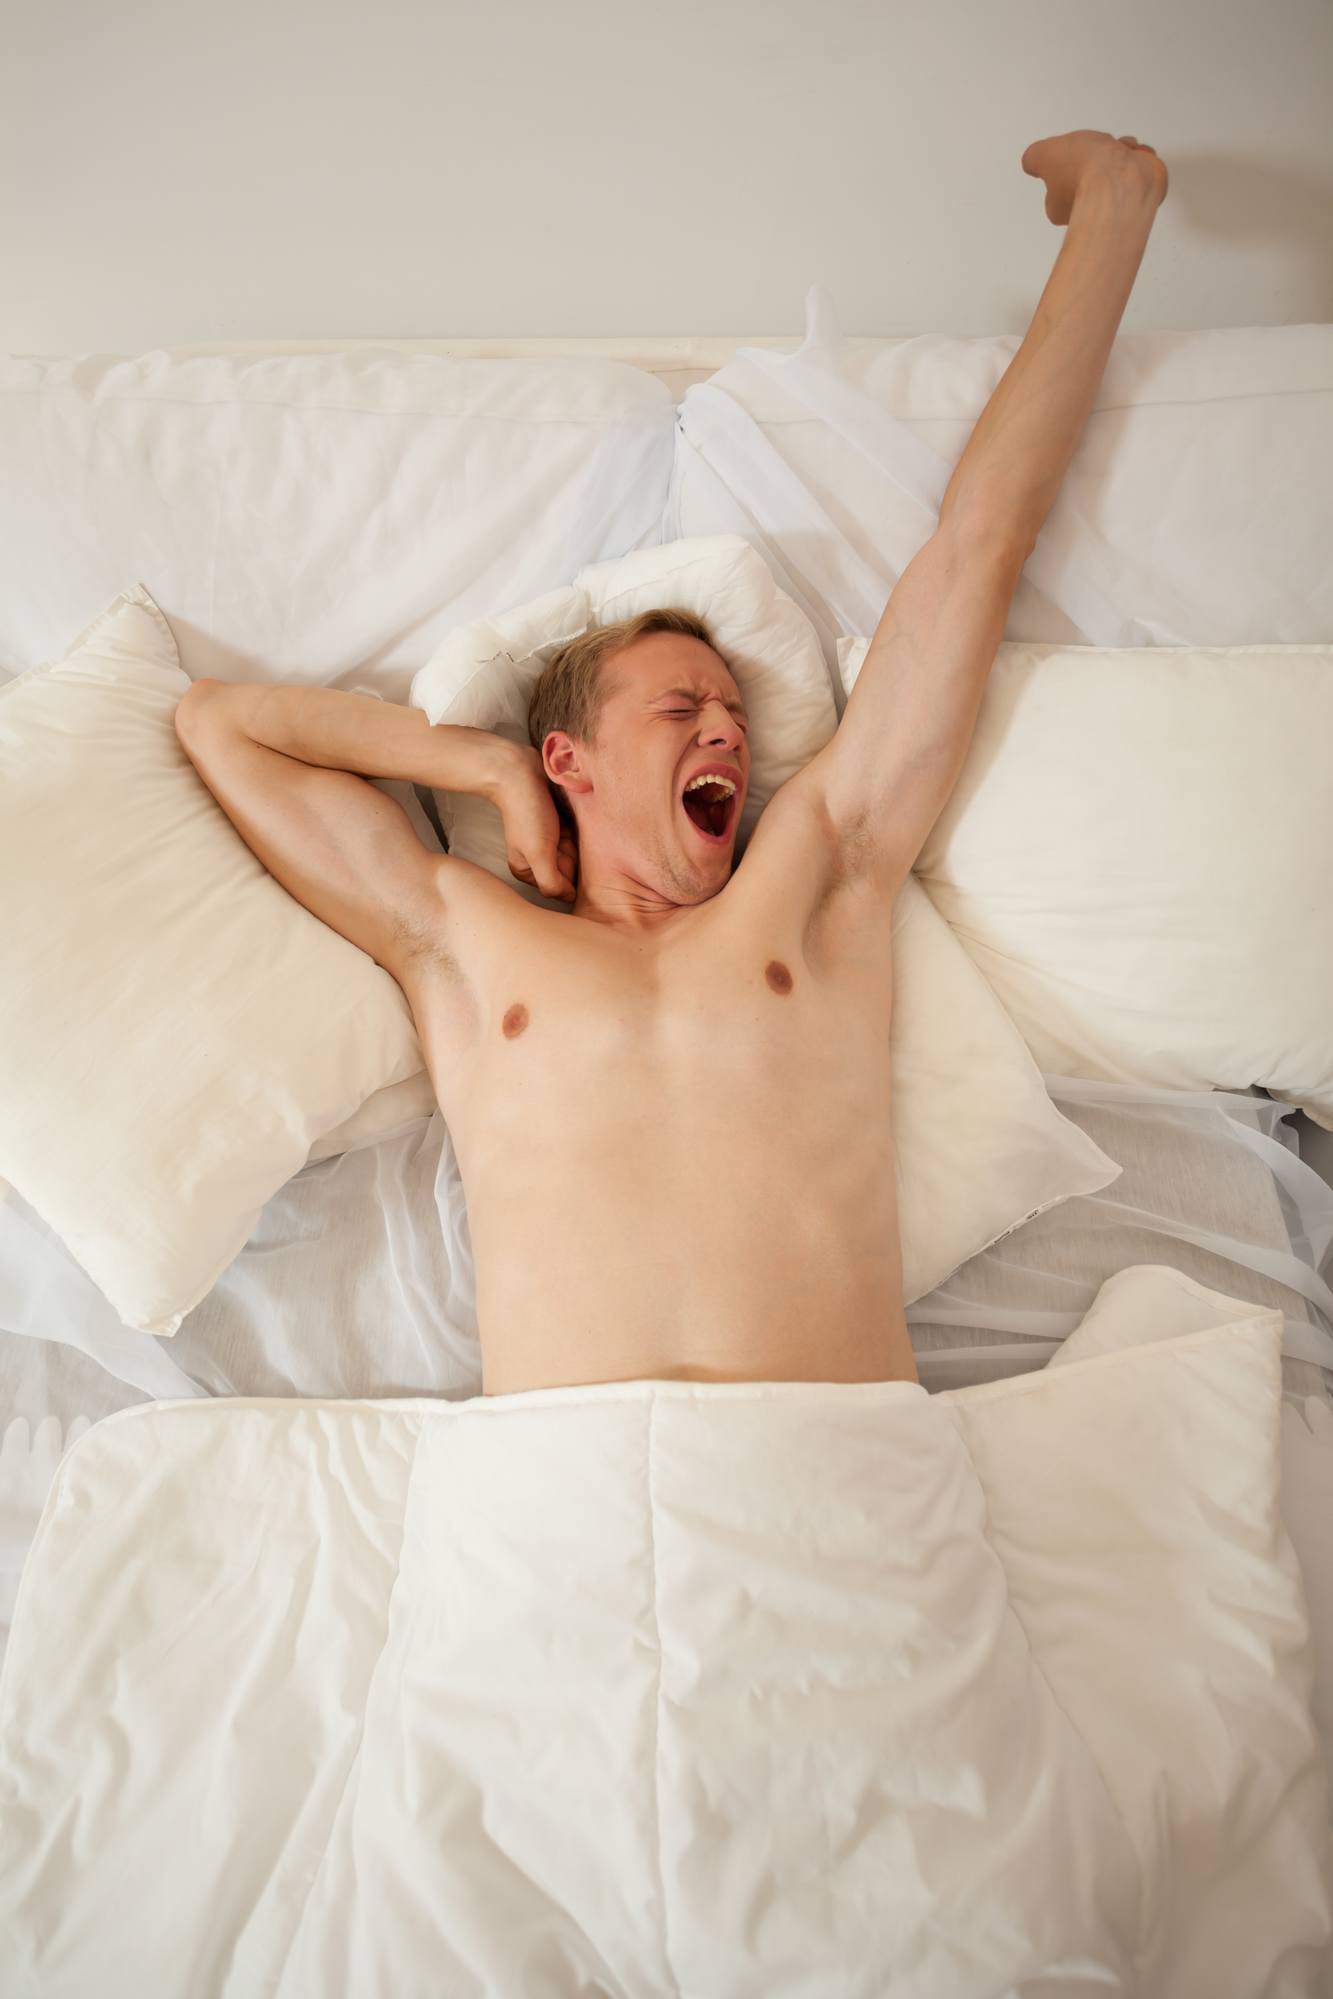 Man waking up and yawning in bed